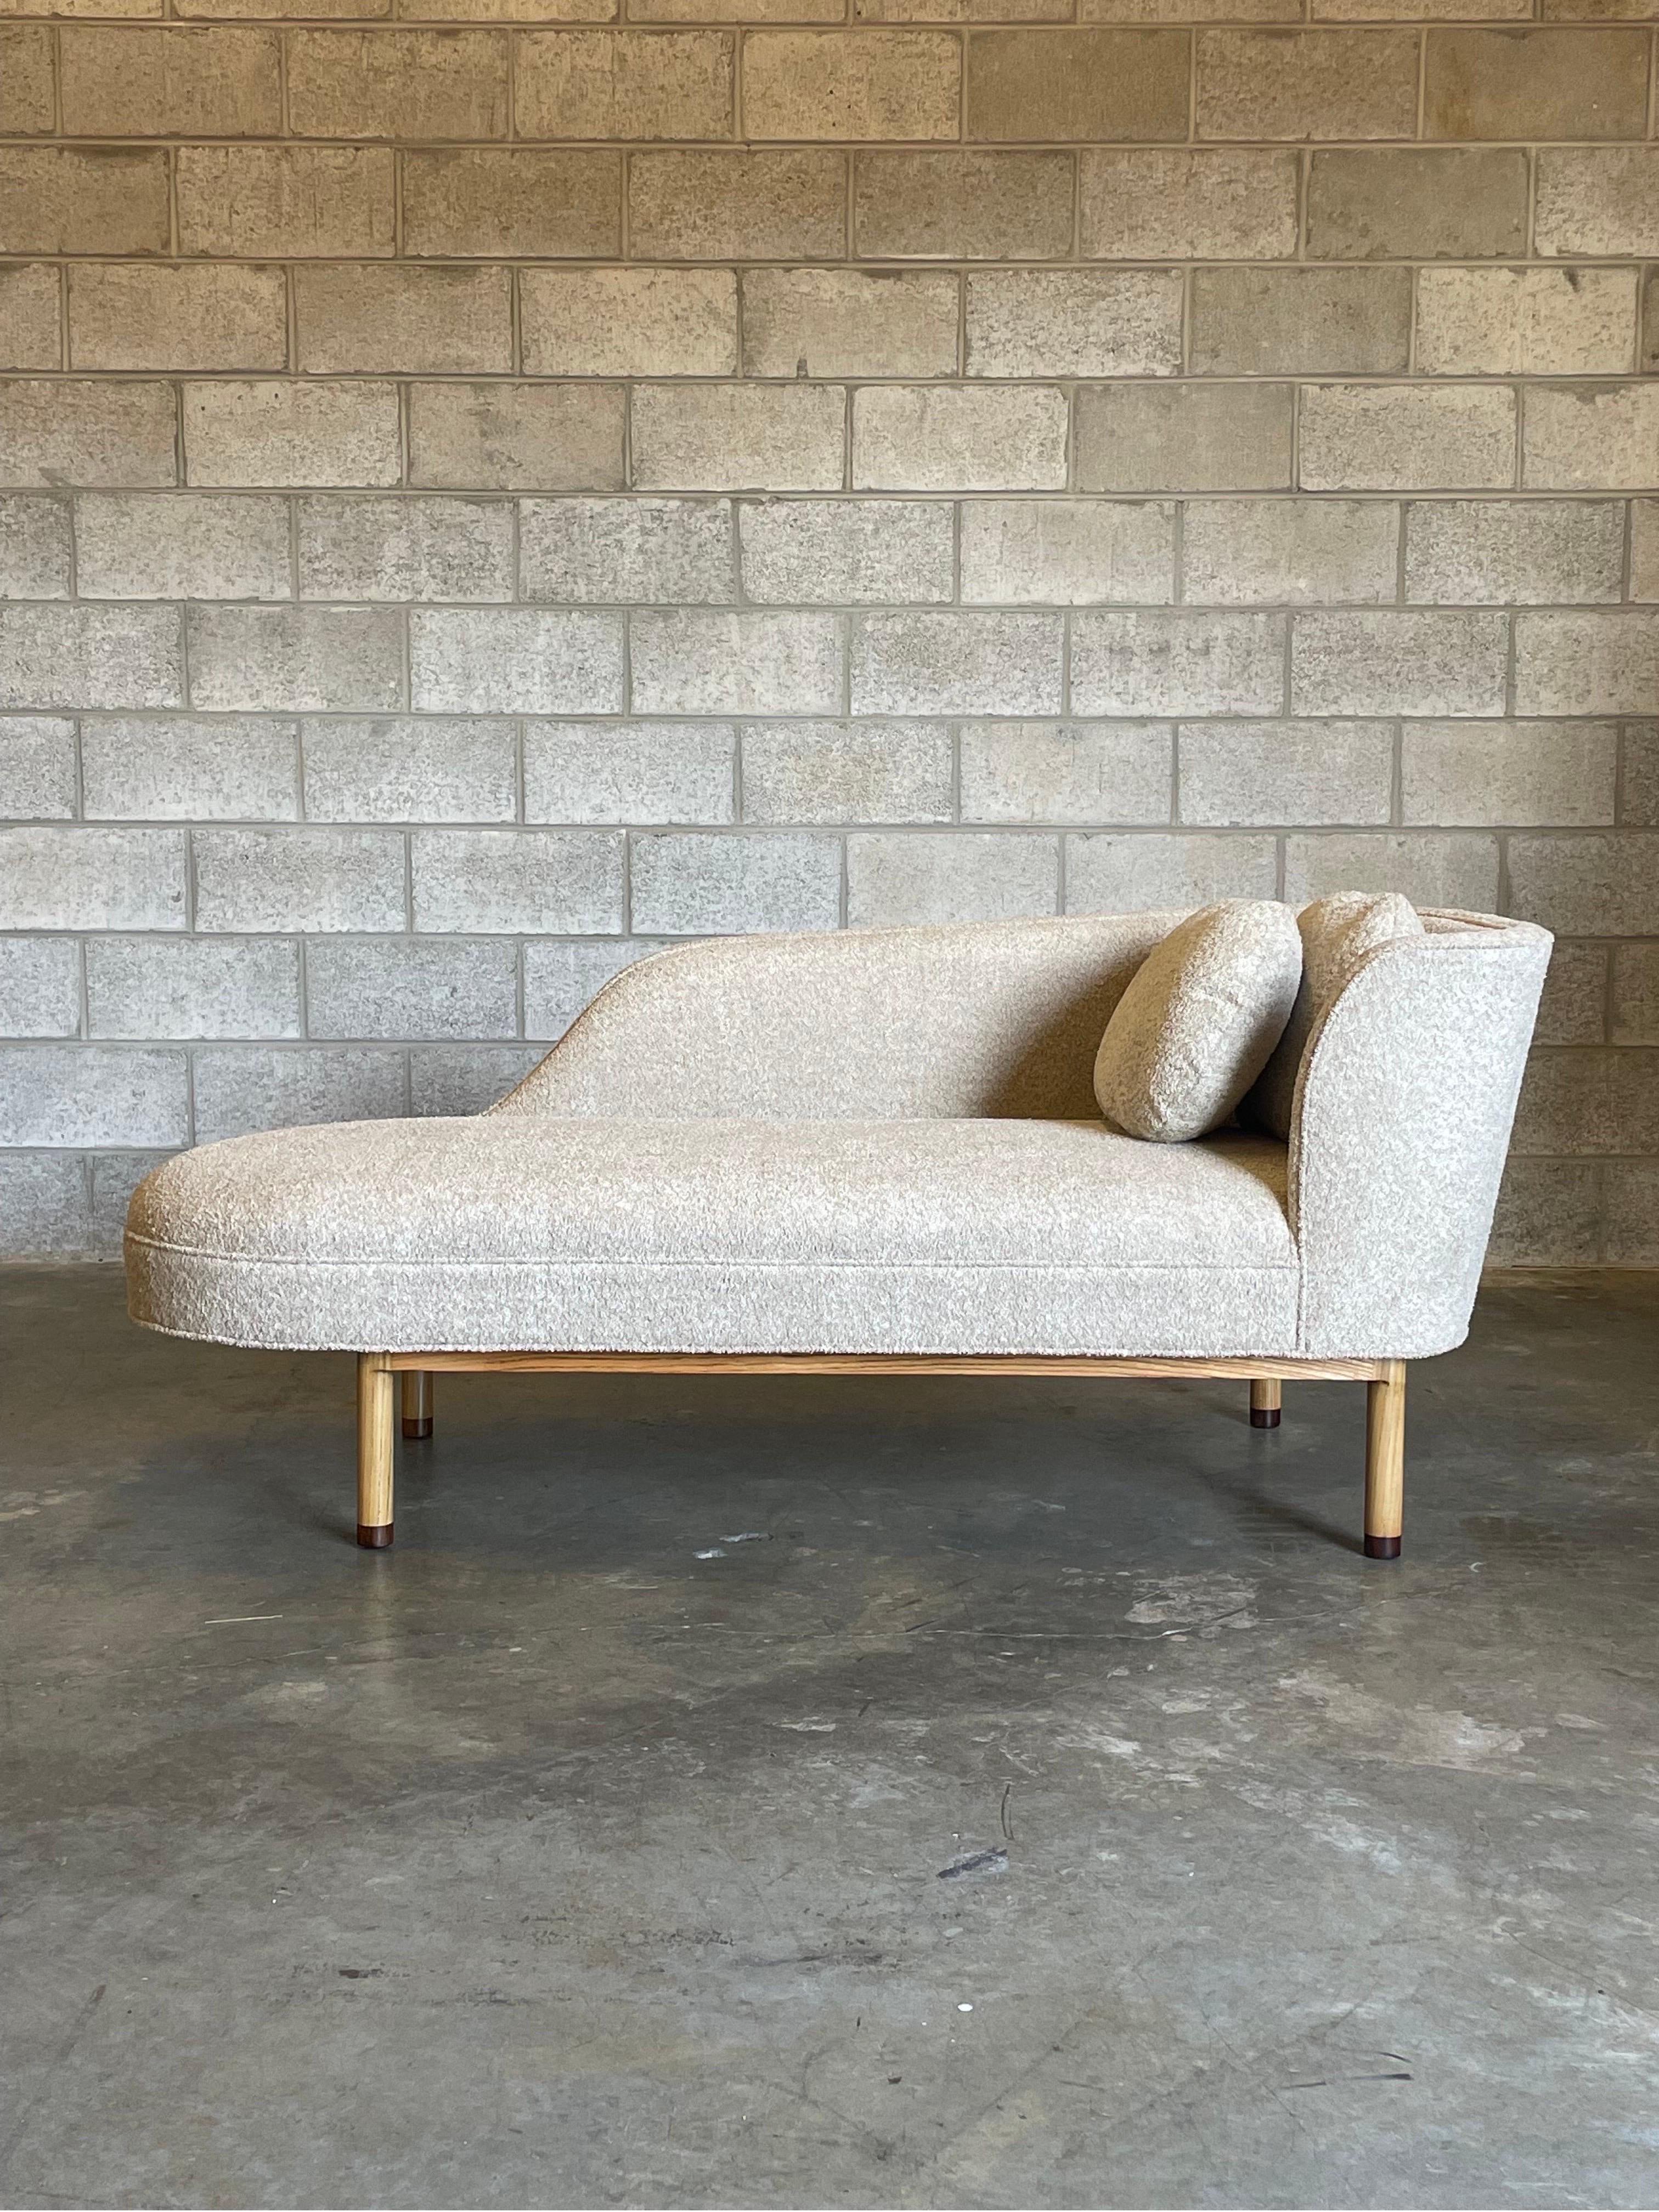 Edward Wormley for Dunbar chaise model 6750L. A beautiful and elegant chaise with a bleached/ natural colored ash frame complete with dark feet. Reupholstered in Robert Allen Camel/ Sand bouclé. Chaise is unmarked but is a documented